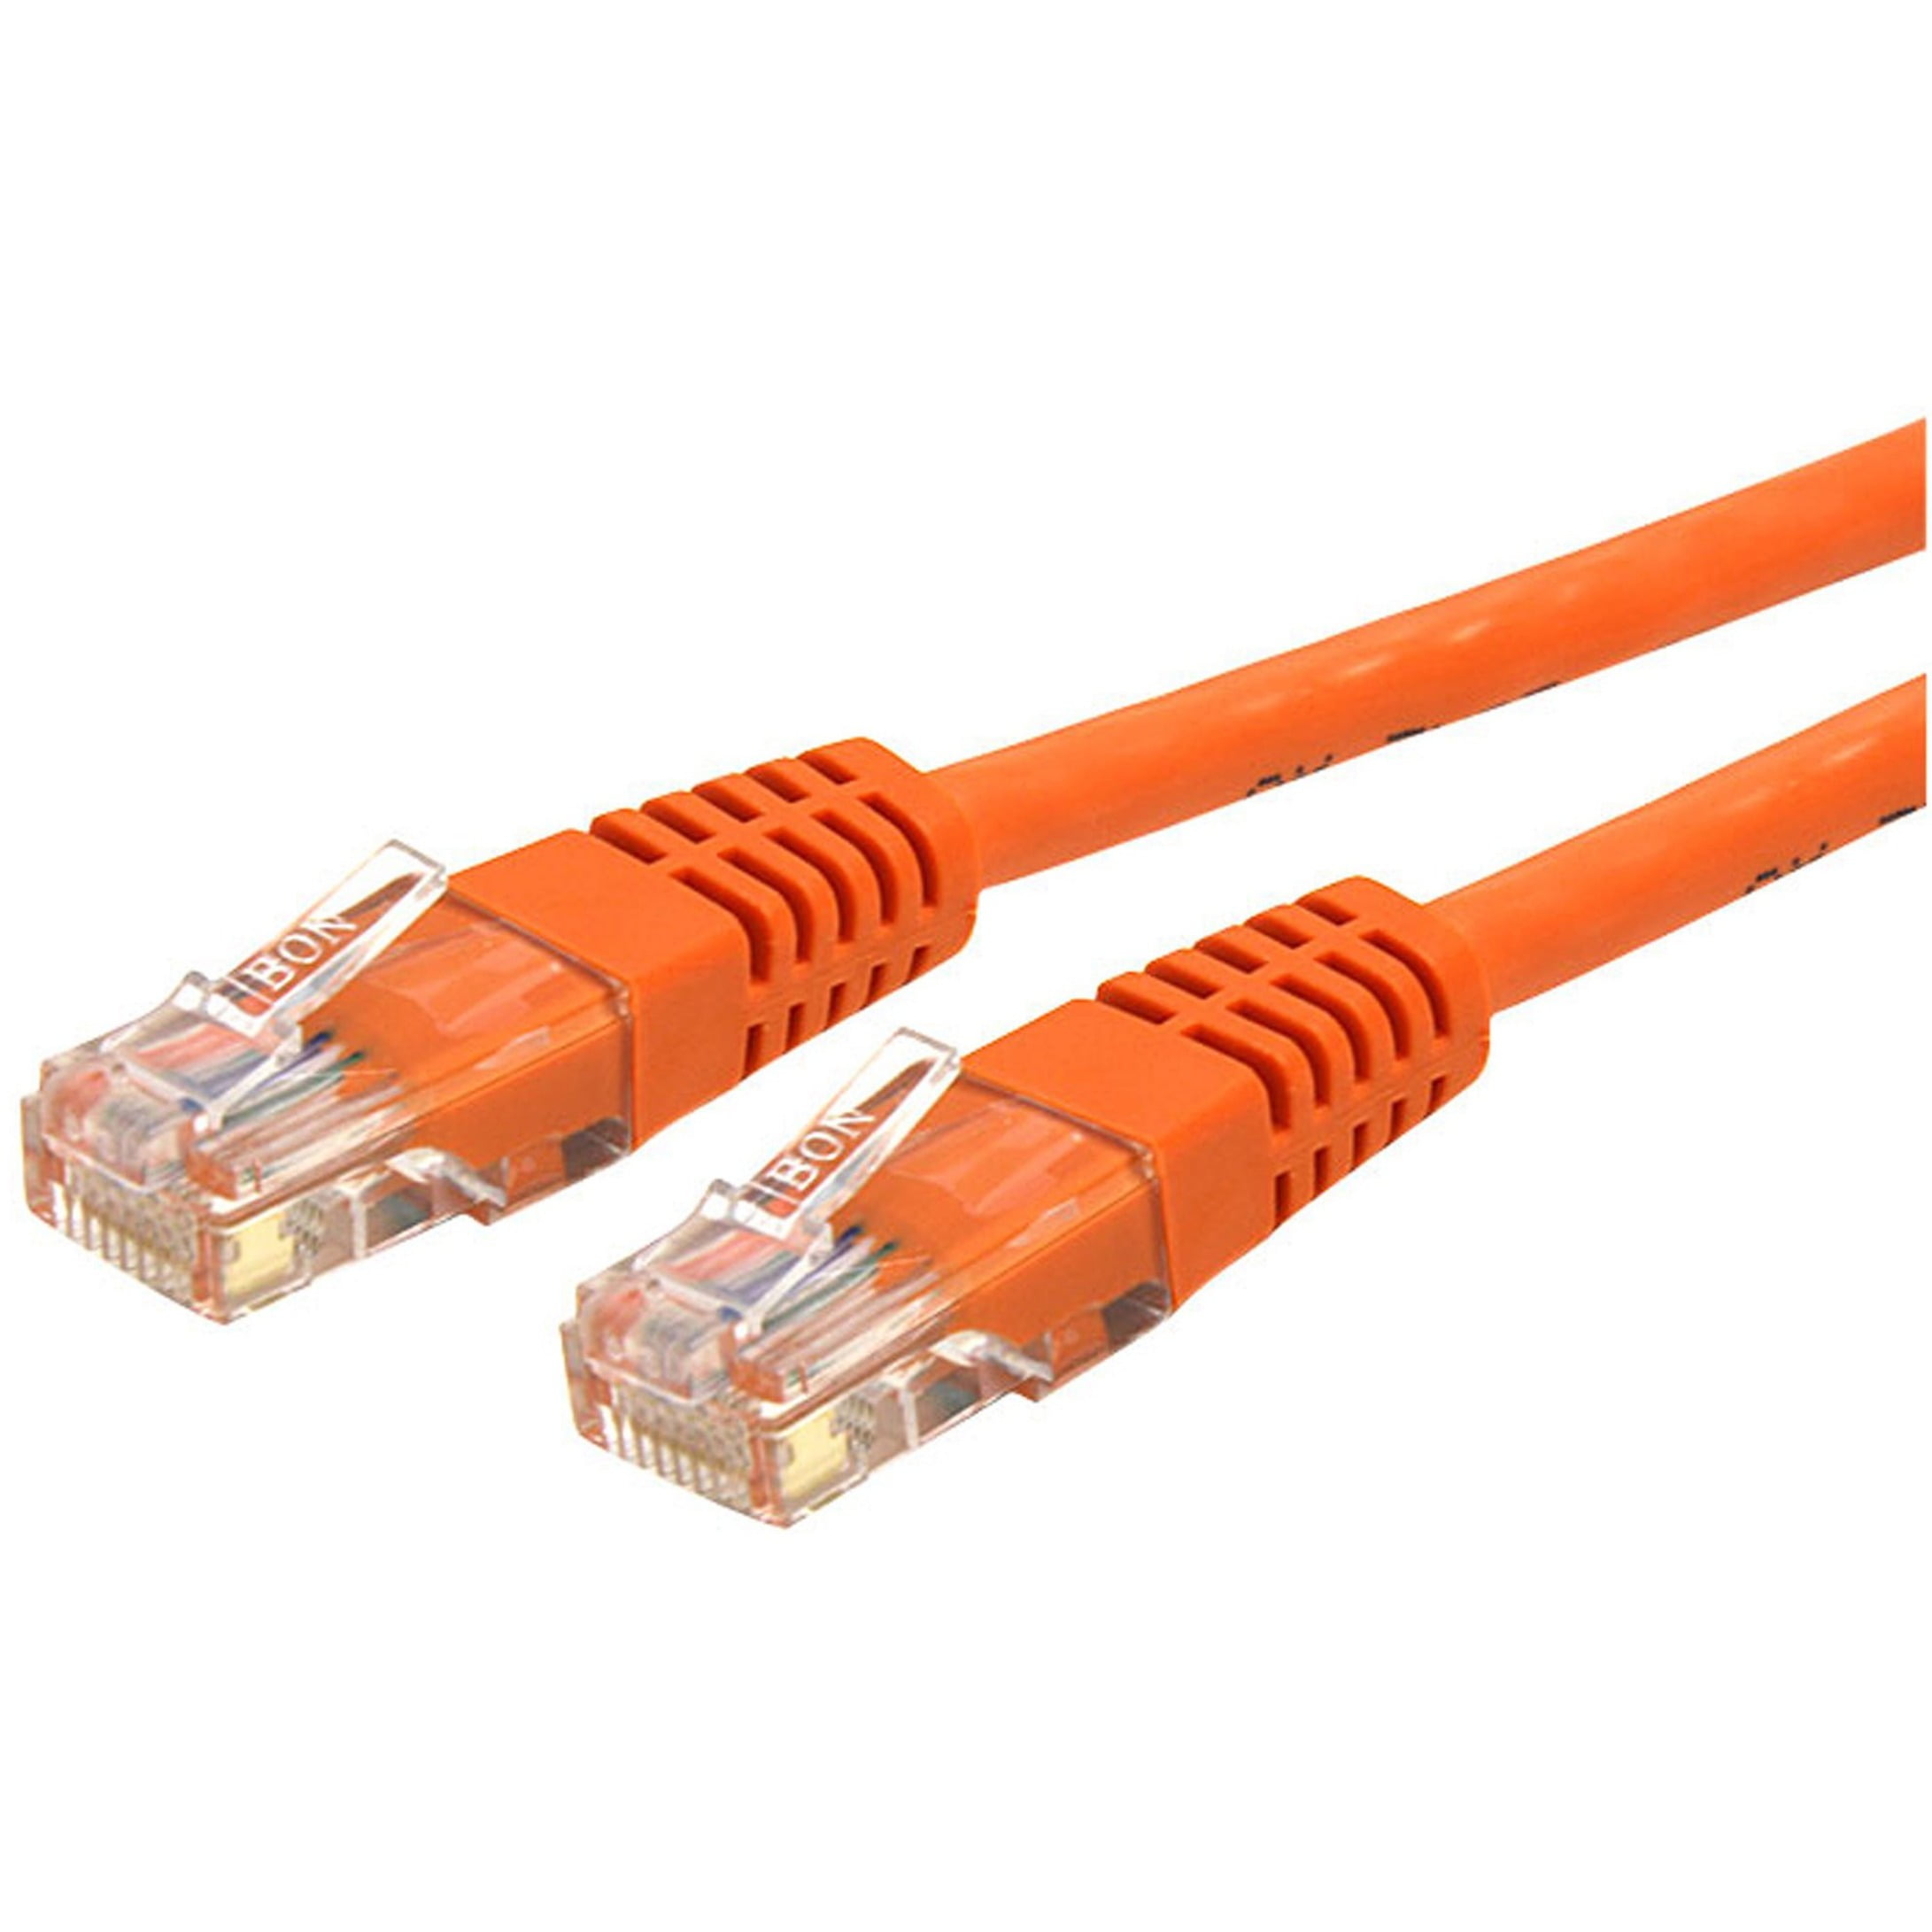 CAT6 ETHERNET PATCH CABLE 25FT ORANGE CATEGORY 6 ROUTER CORD 25' SNAGLESS RJ45 